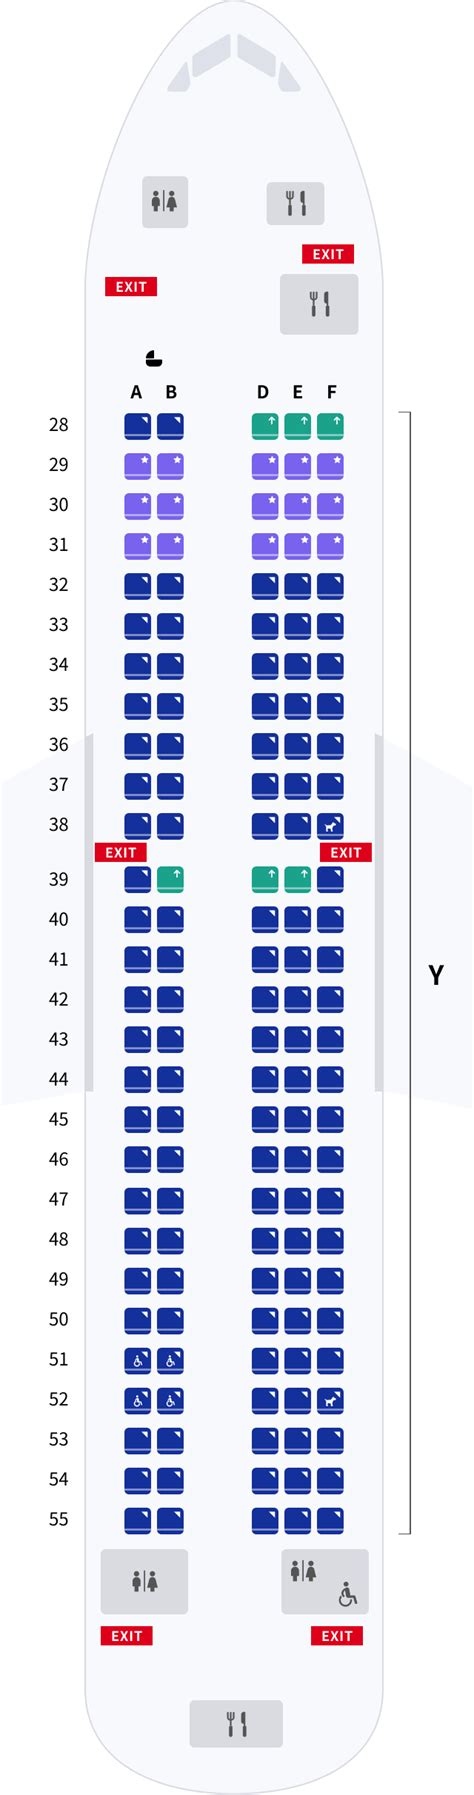 Airbus A220 300 Seating Diagrams Image To U